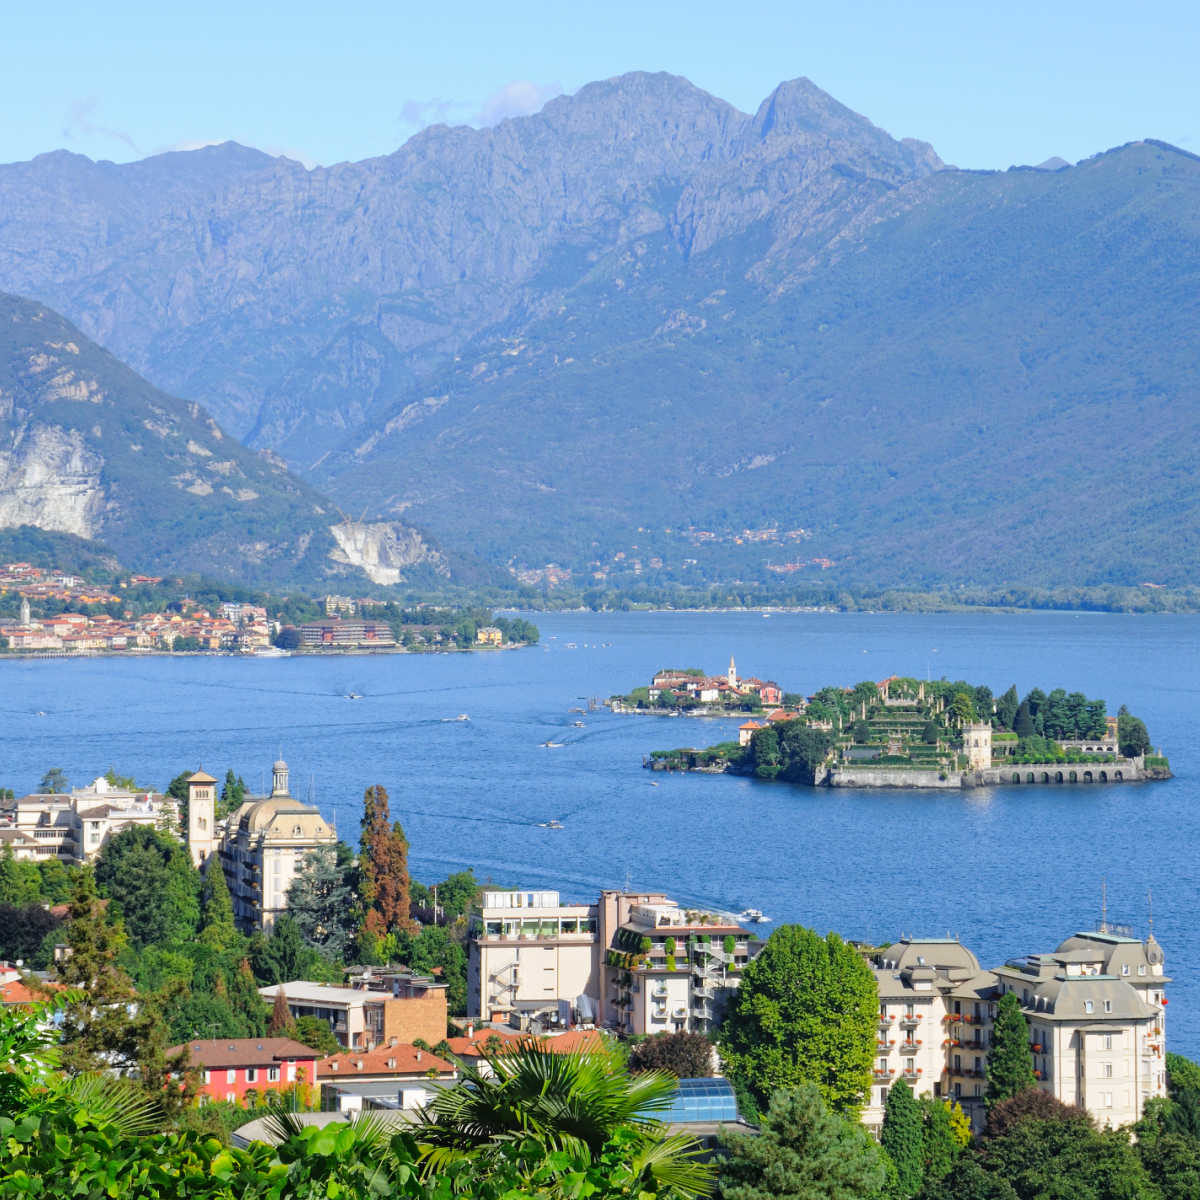 Scenic view on beautiful Lake Maggiore among the mountains, Italy